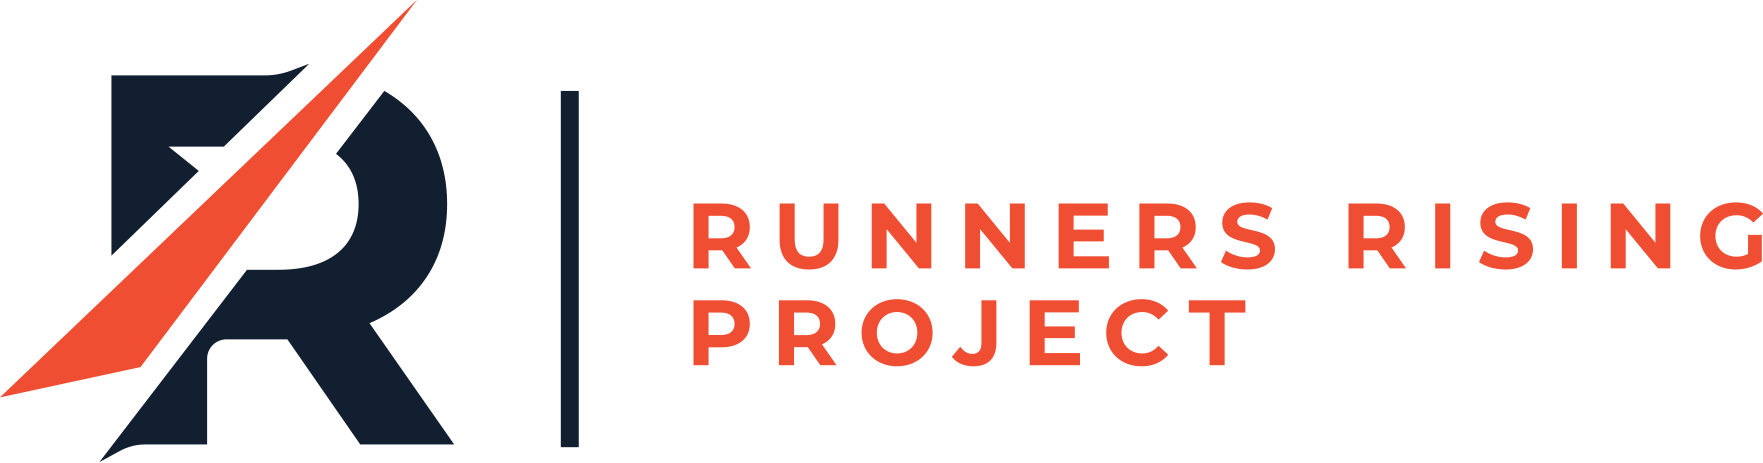 Runners Rising Project, Inc. logo